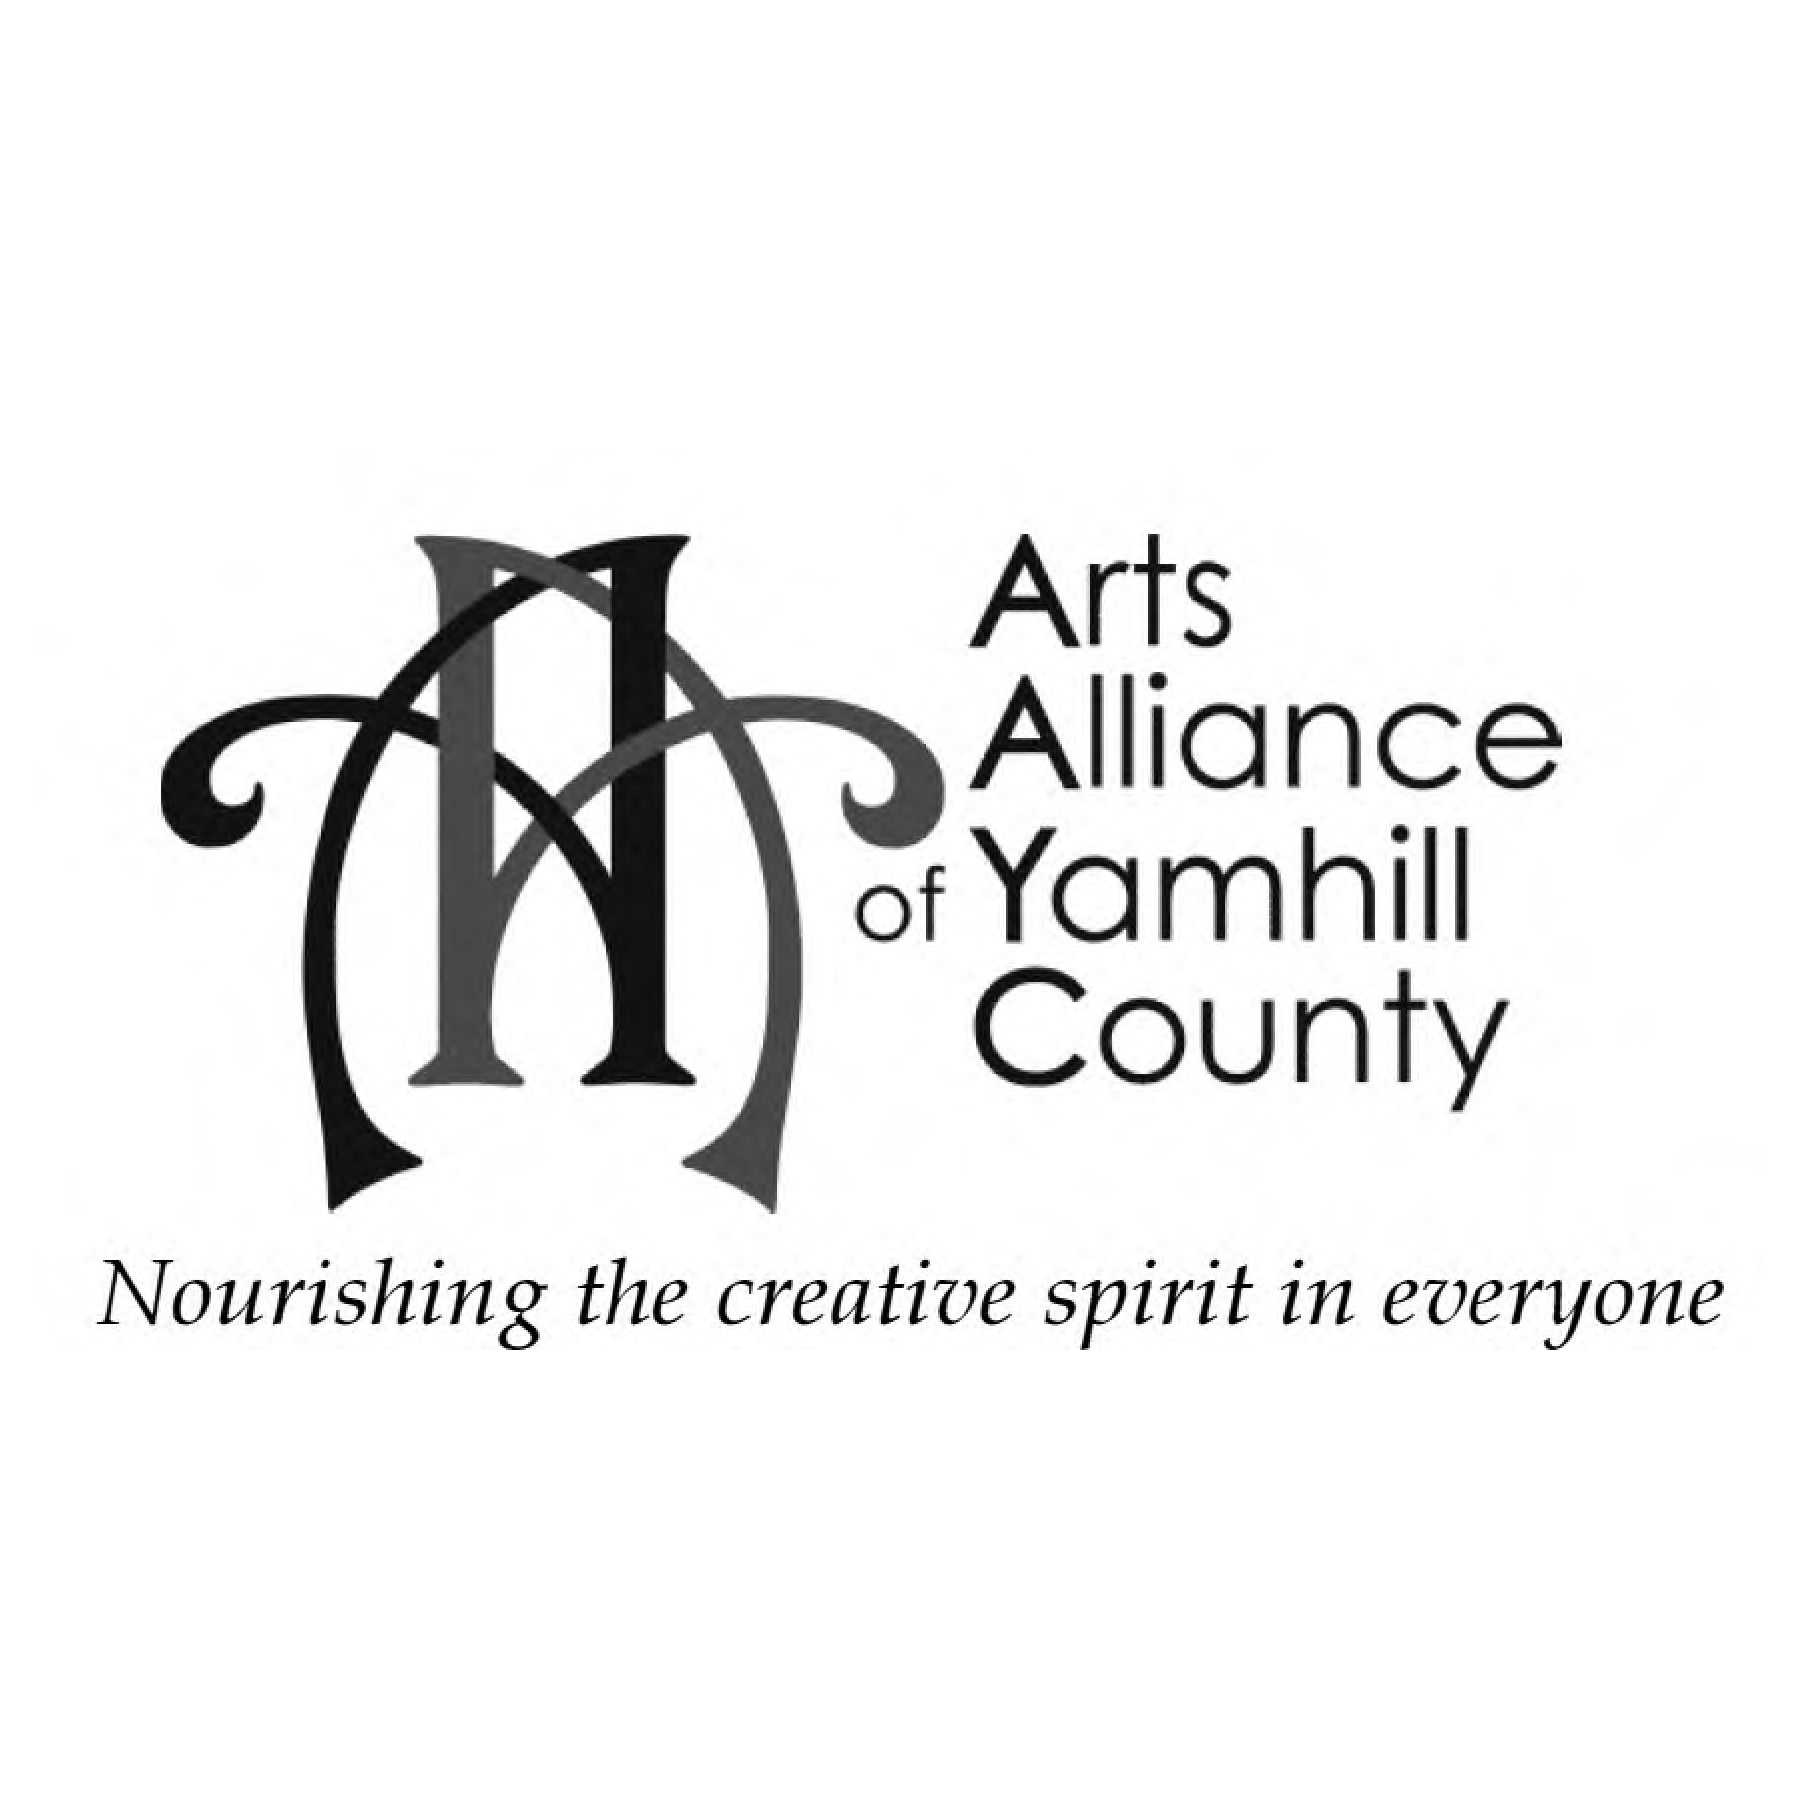 Arts Alliance of Yamhill County